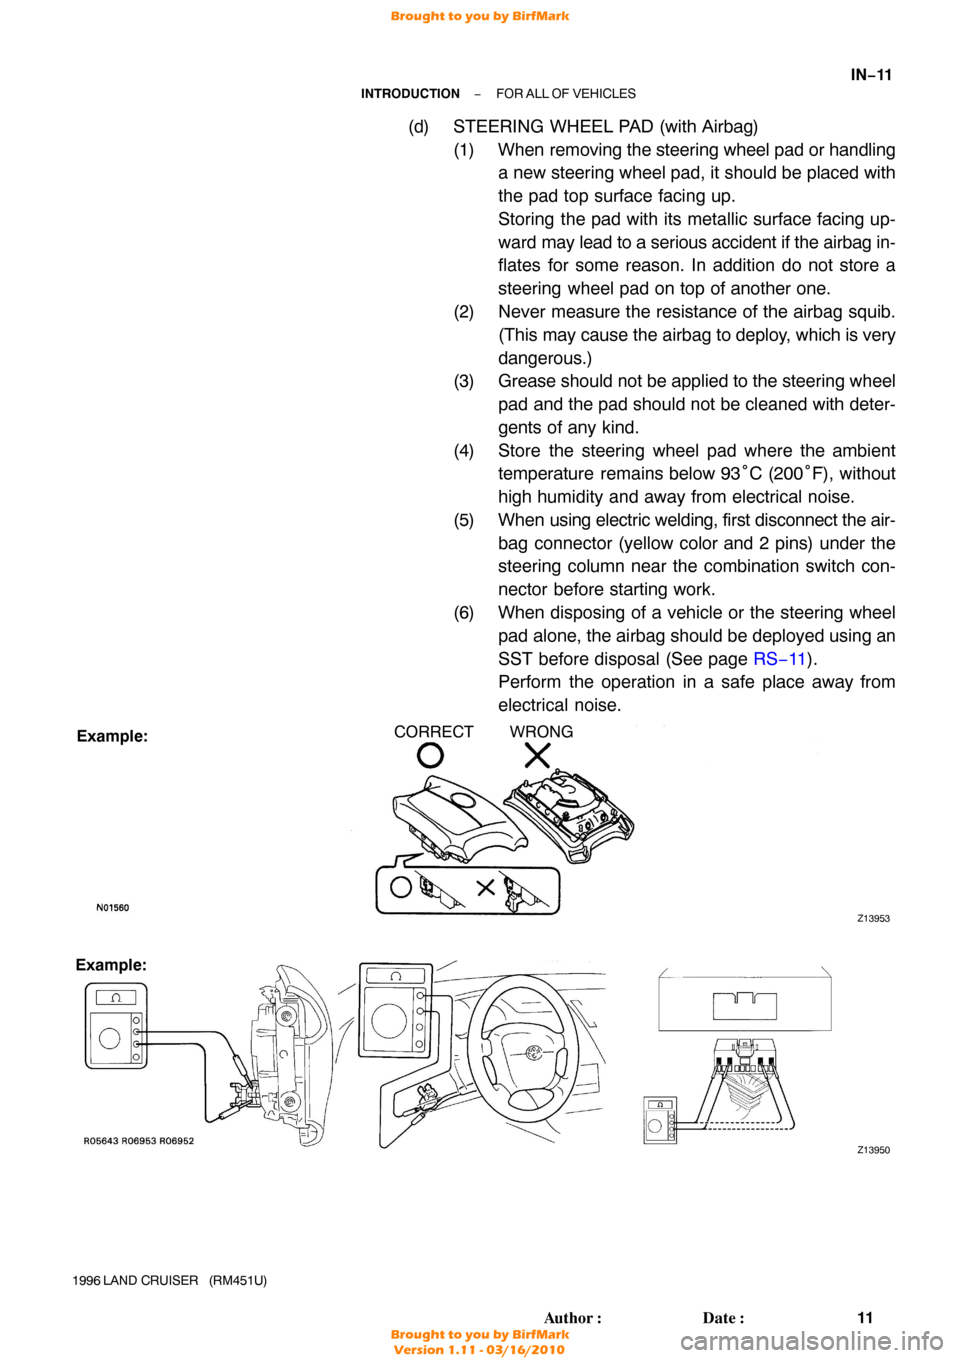 TOYOTA LAND CRUISER 1996 J80 User Guide Z13953
Example:CORRECT WRONG
Z13950
Example:
−
INTRODUCTION FOR ALL OF VEHICLES
IN−11
11
Author: Date:
1996 LAND  CRUISER   (RM451U)
(d) STEERING WHEEL PAD (with Airbag)
(1) When removing the st